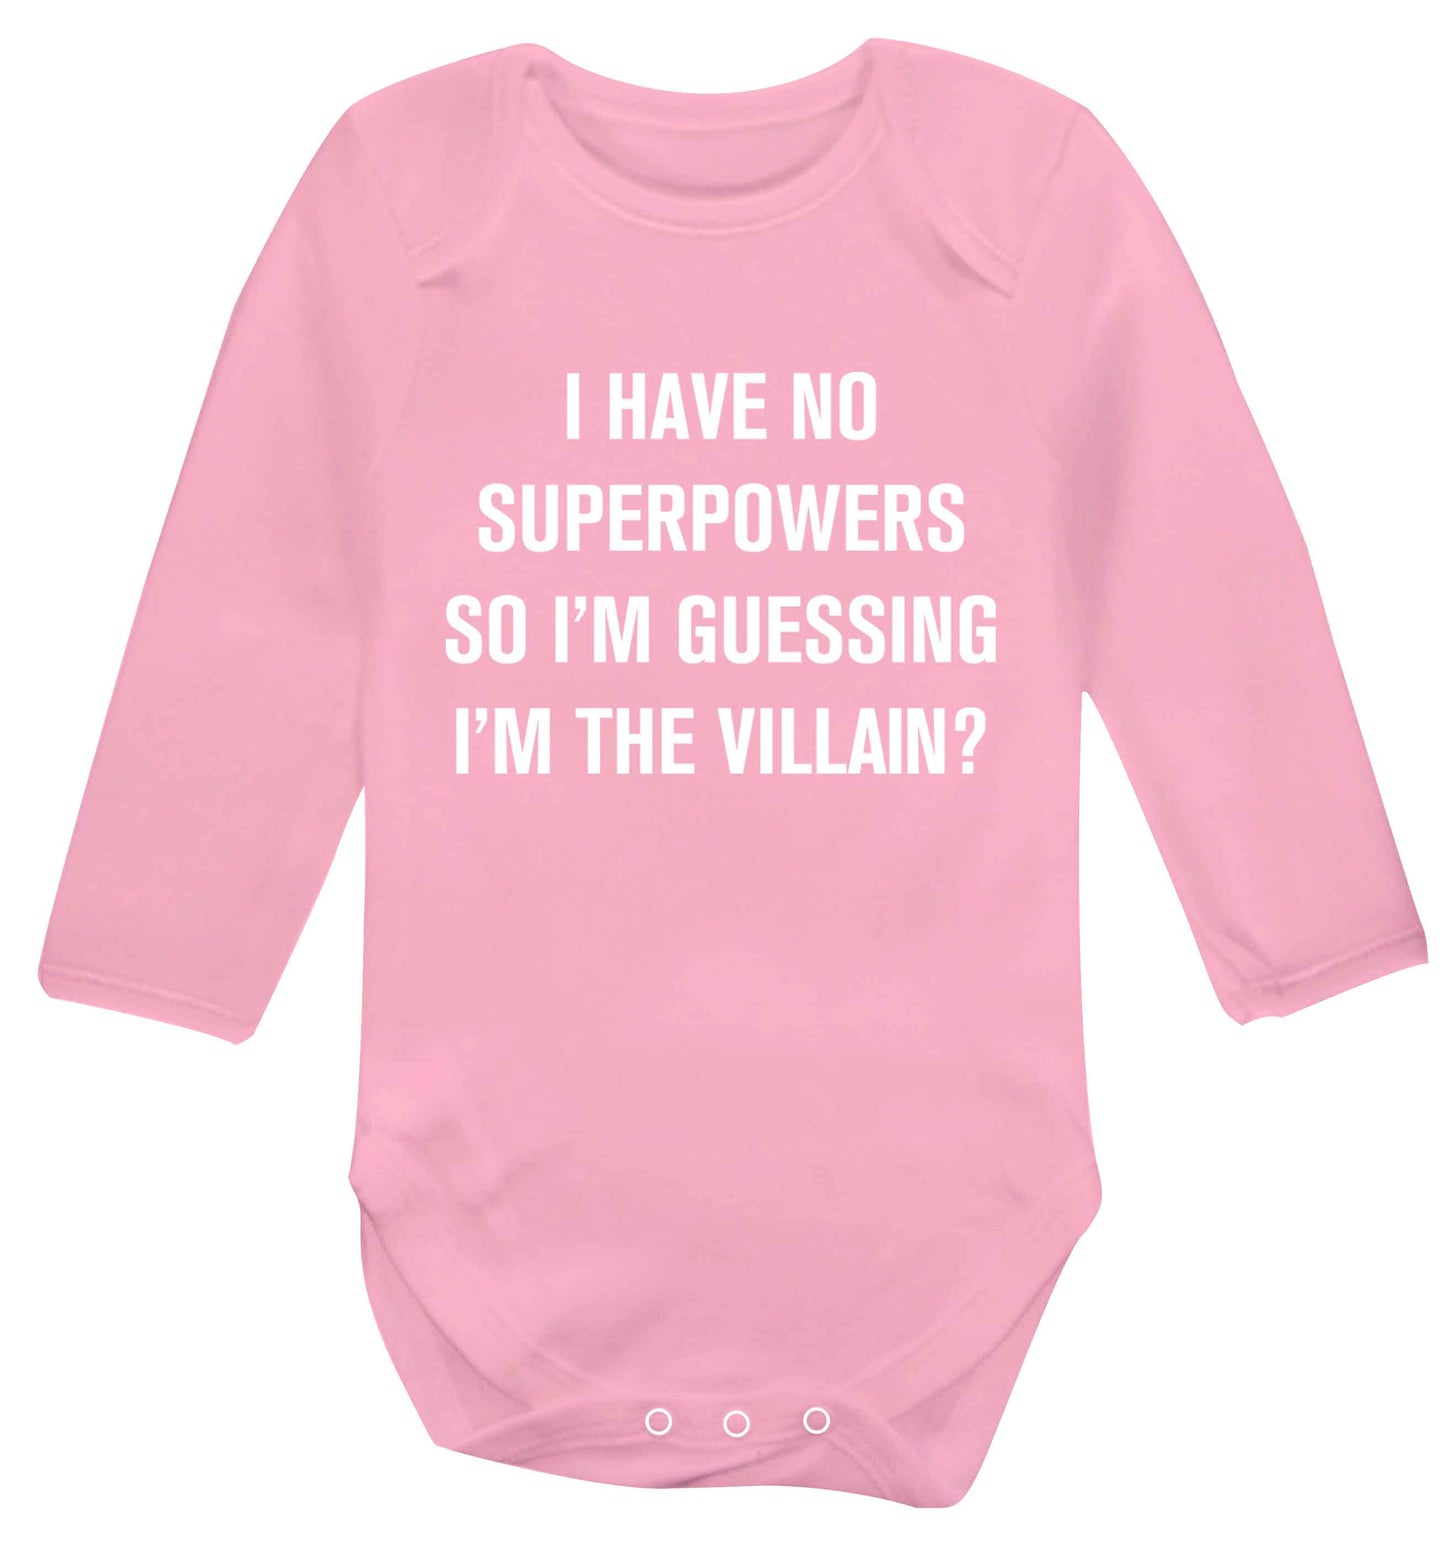 I have no superpowers so I'm guessing I'm the villain? Baby Vest long sleeved pale pink 6-12 months